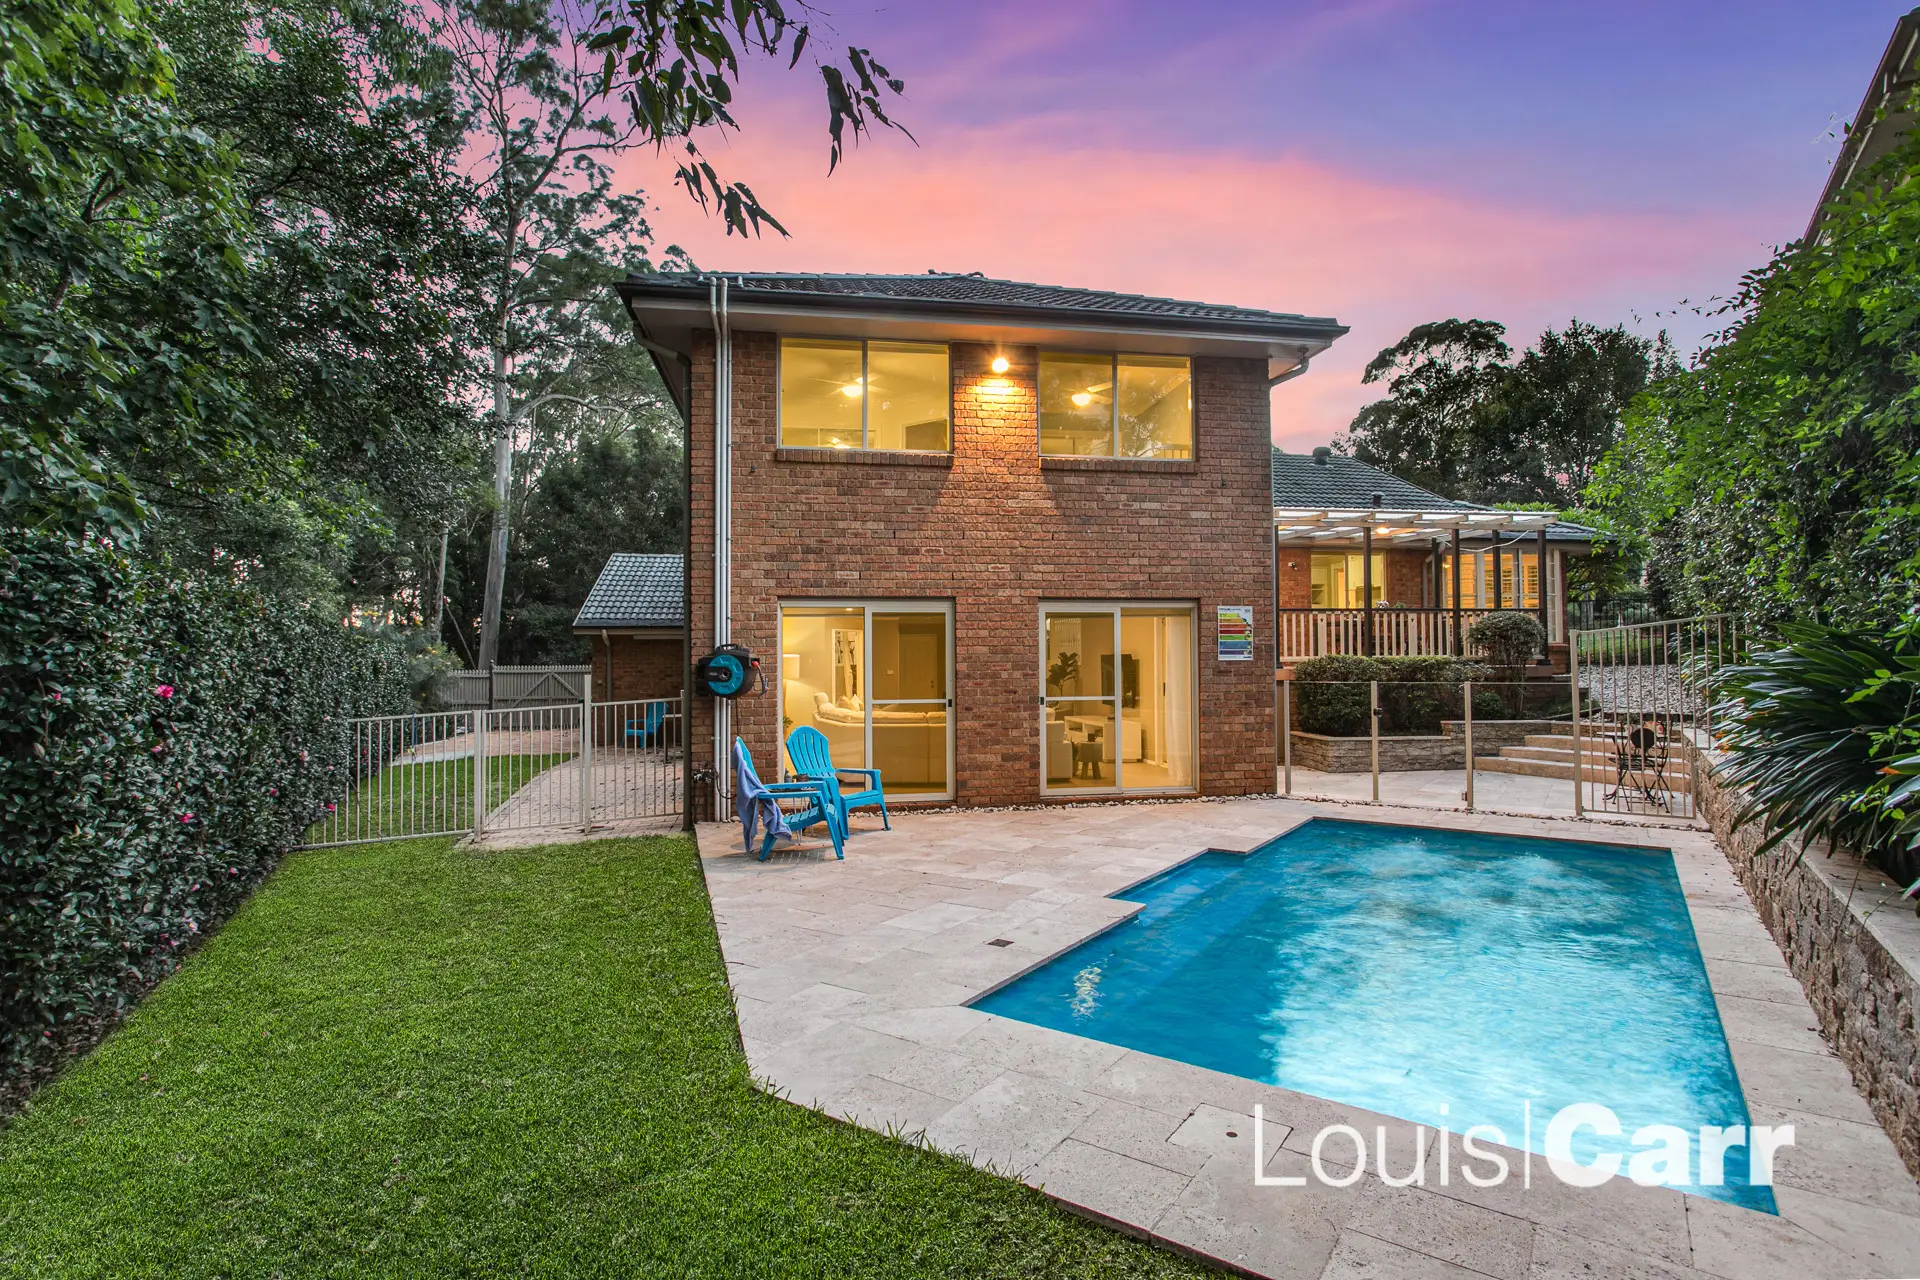 Photo #11: 18 Lyndhurst Court, West Pennant Hills - Sold by Louis Carr Real Estate